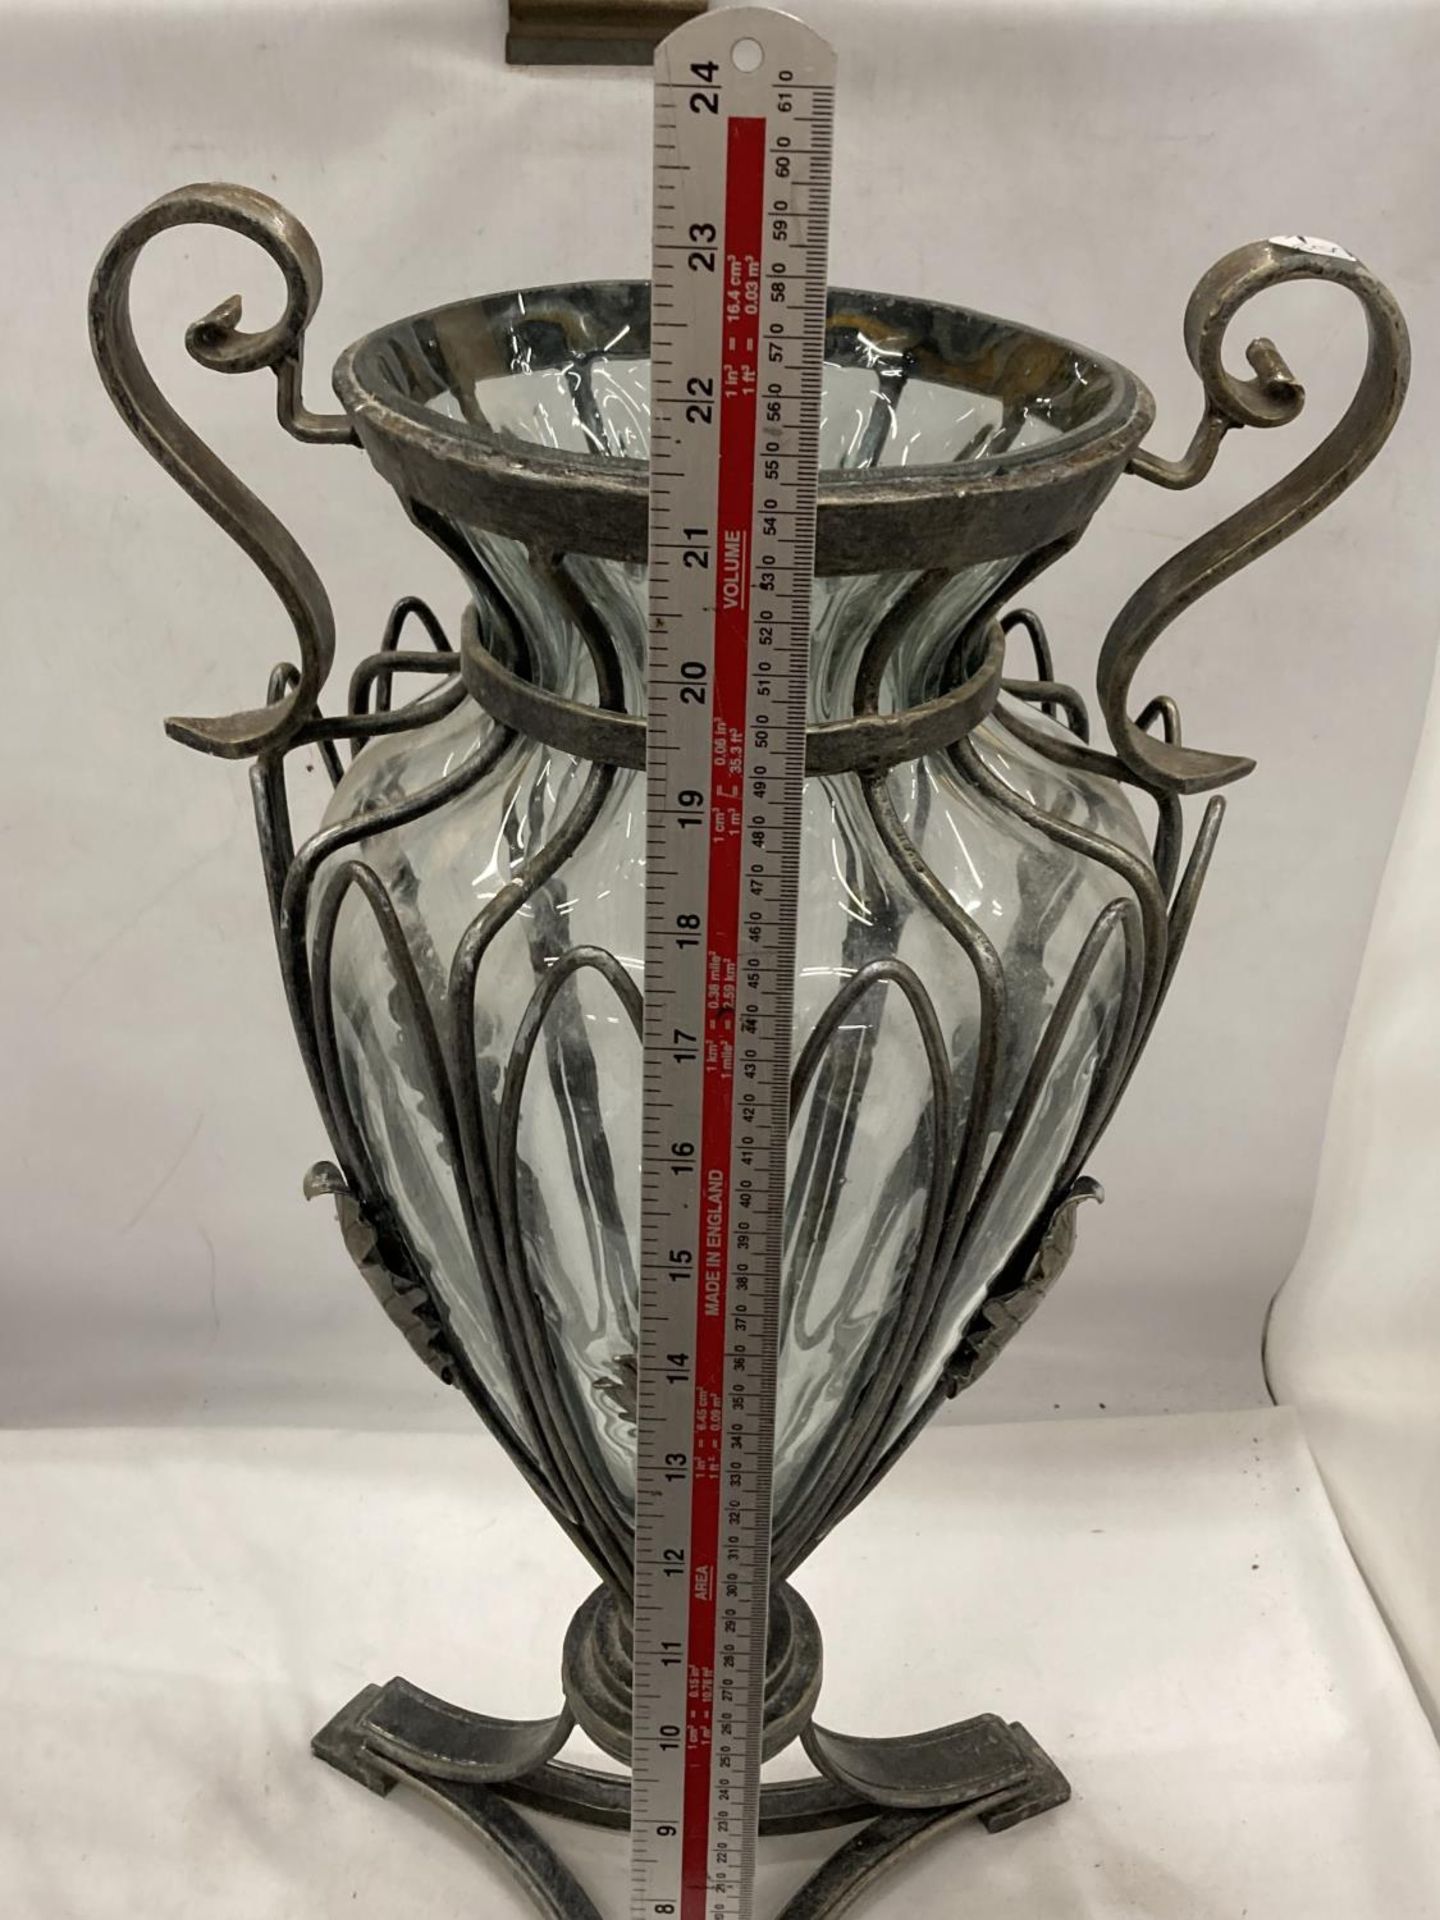 AN ART DECO STYLE VINTAGE GLASS VASE WITH PEWTER CAGE HEIGHT 54 CM - Image 4 of 4